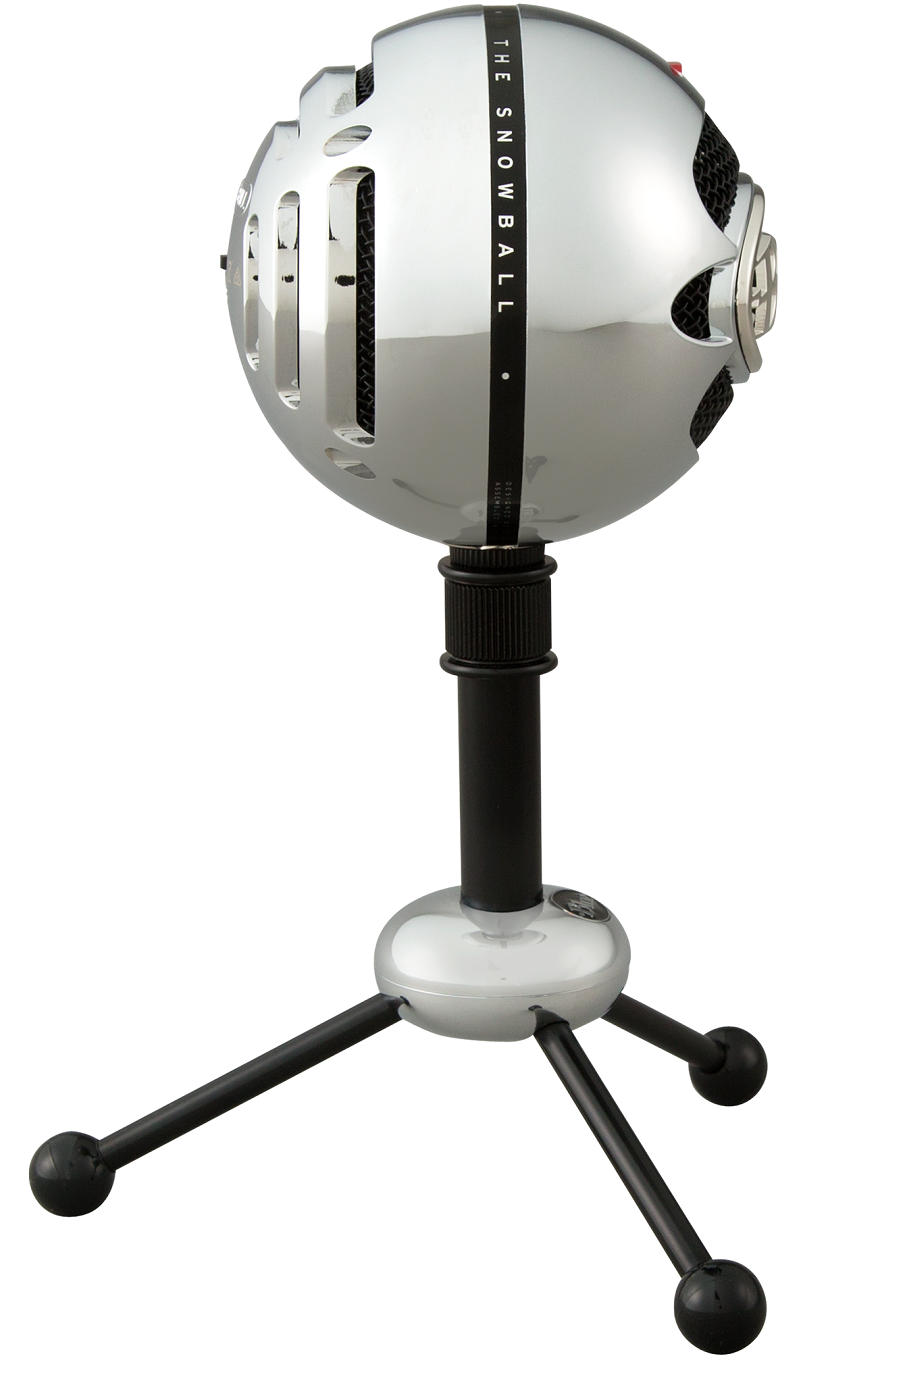 Blue Snowball (brushed Aluminum) - Microphone usb - Variation 1